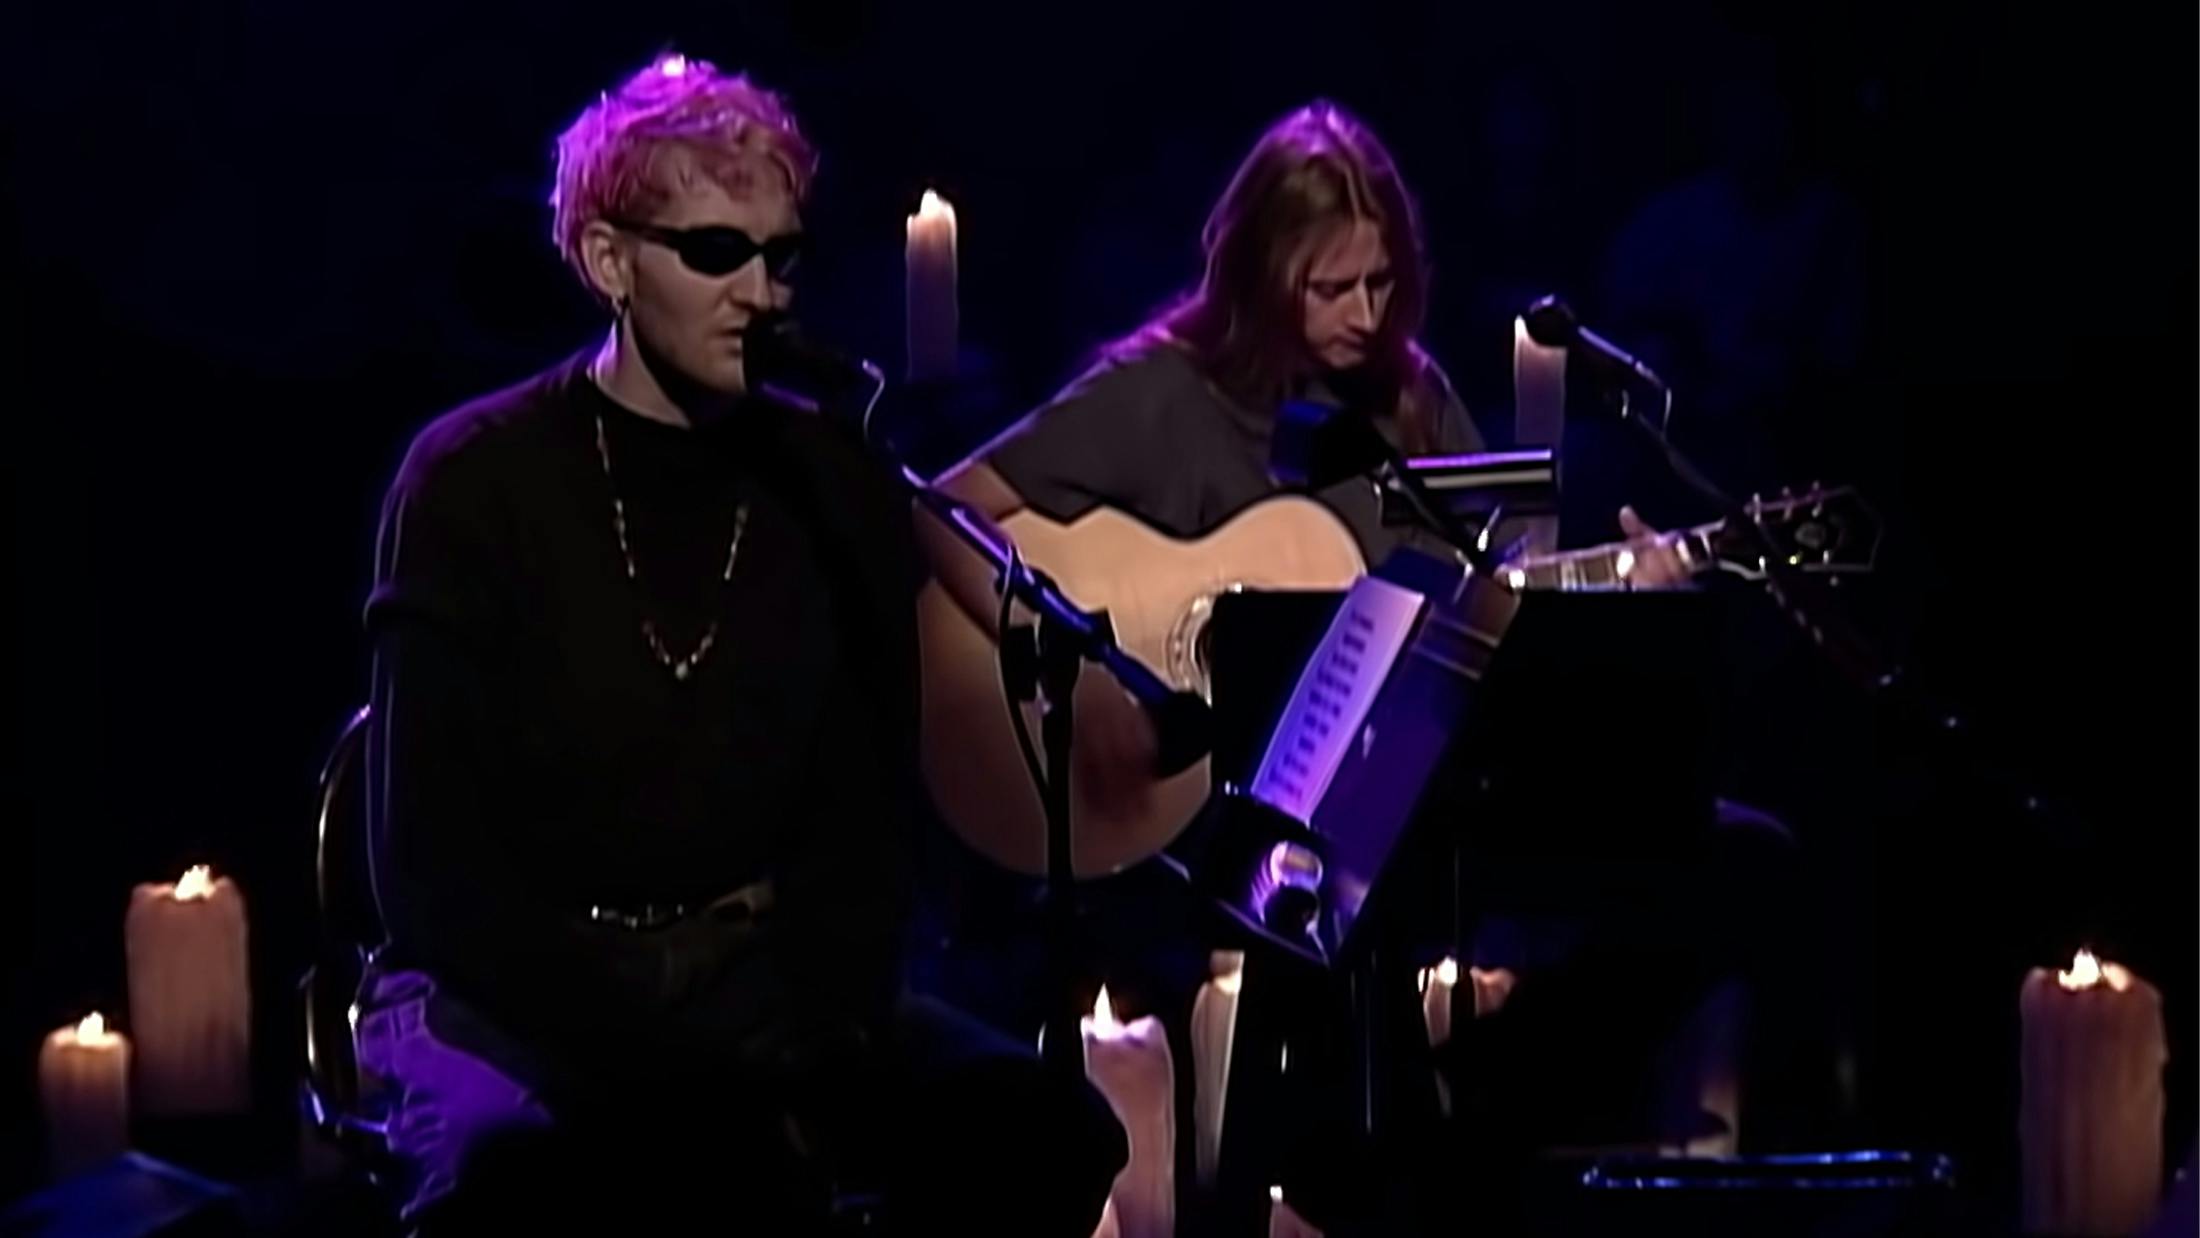 “There’s no safety net, so your songs better be good”: Jerry Cantrell remembers Alice In Chains’ MTV Unplugged